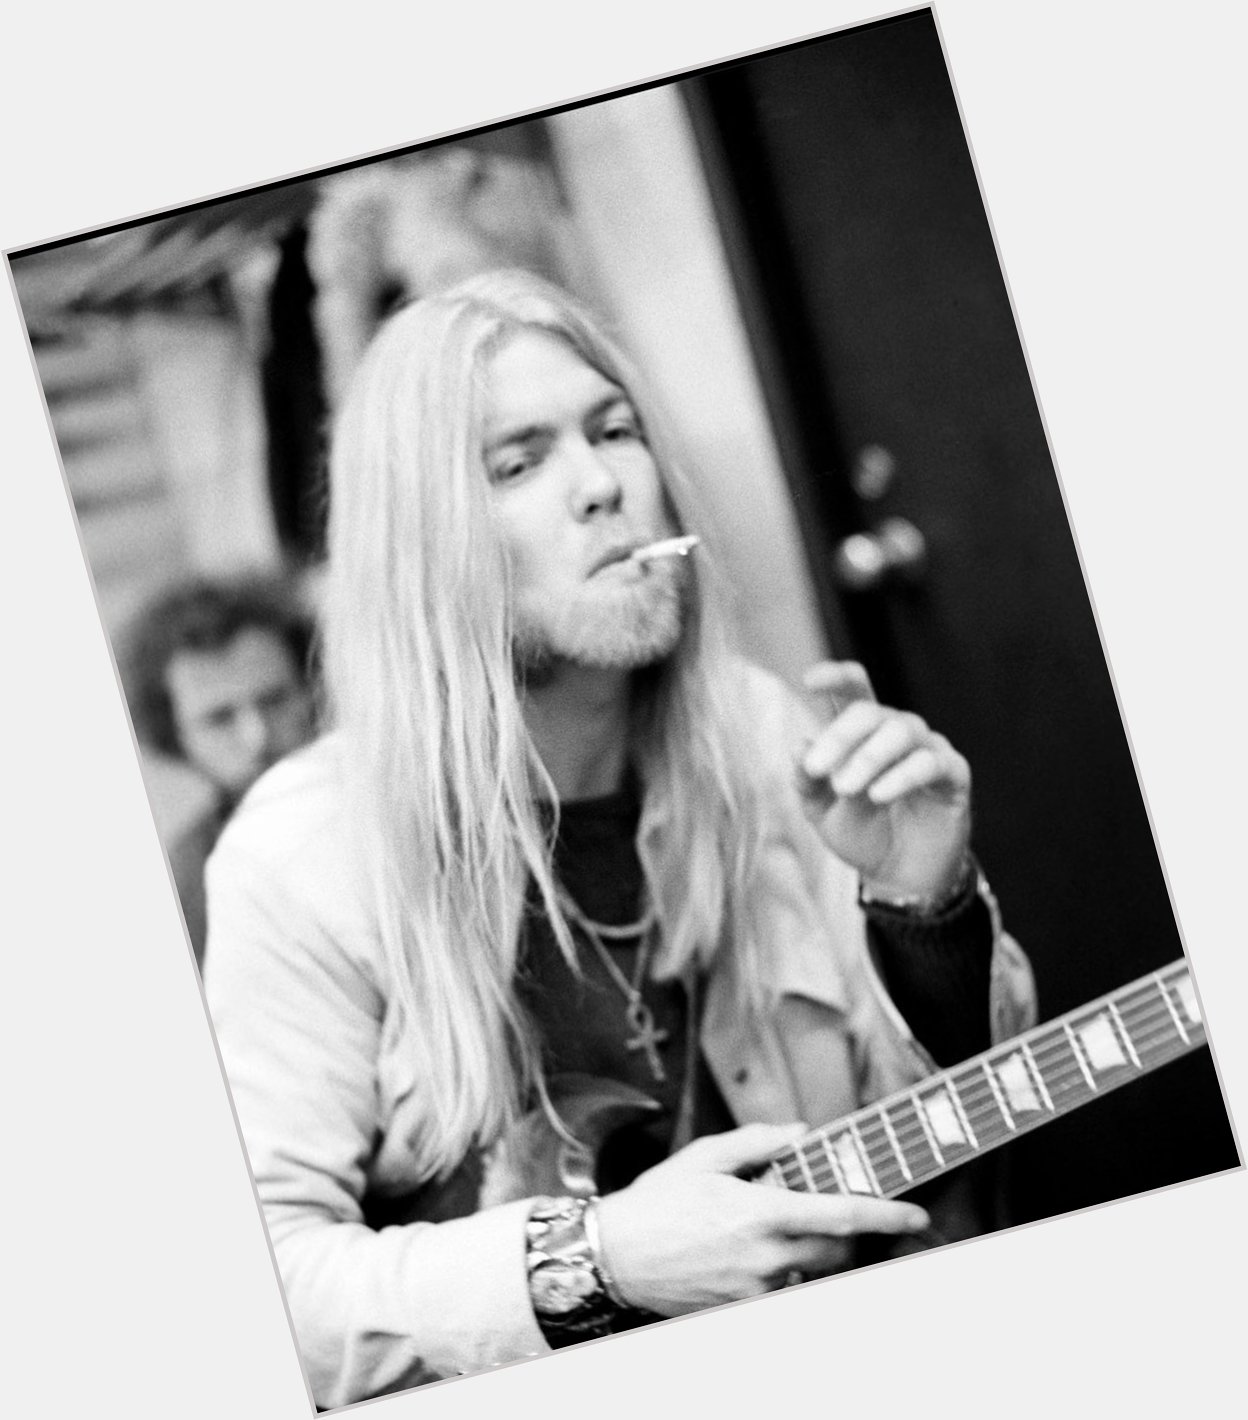 Happy Birthday to the late great Gregg Allman, born on this day in 1947. 